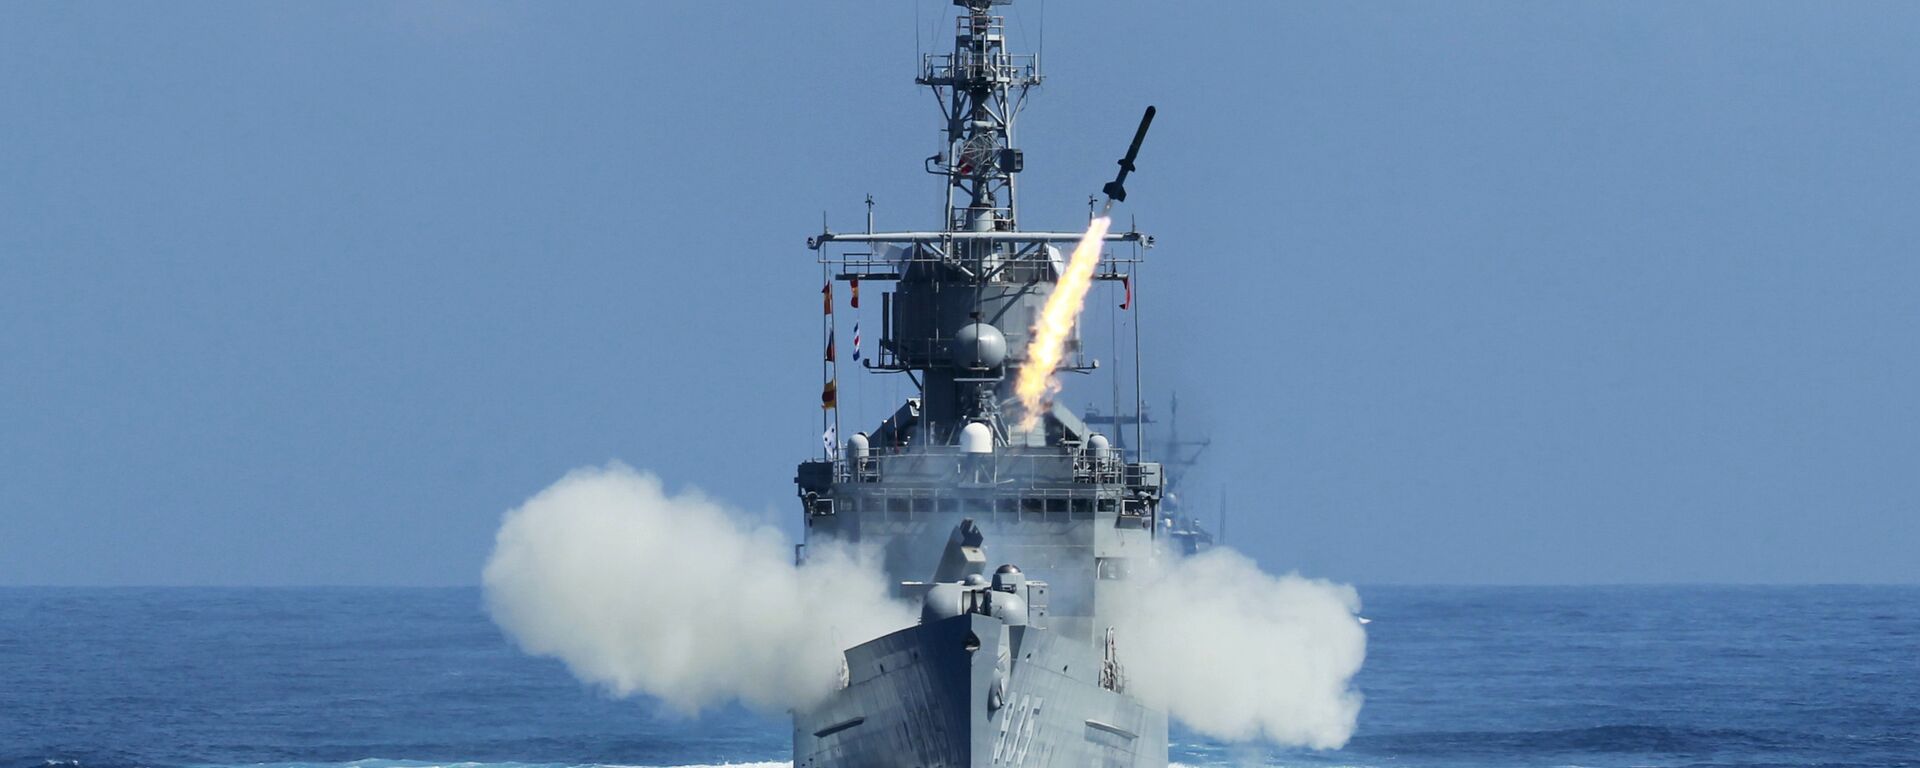 Taiwan Navy's Perry-class frigate launches an ASROC (anti-submarine rocket) during the annual Han Kuang military exercises. - Sputnik International, 1920, 27.06.2023